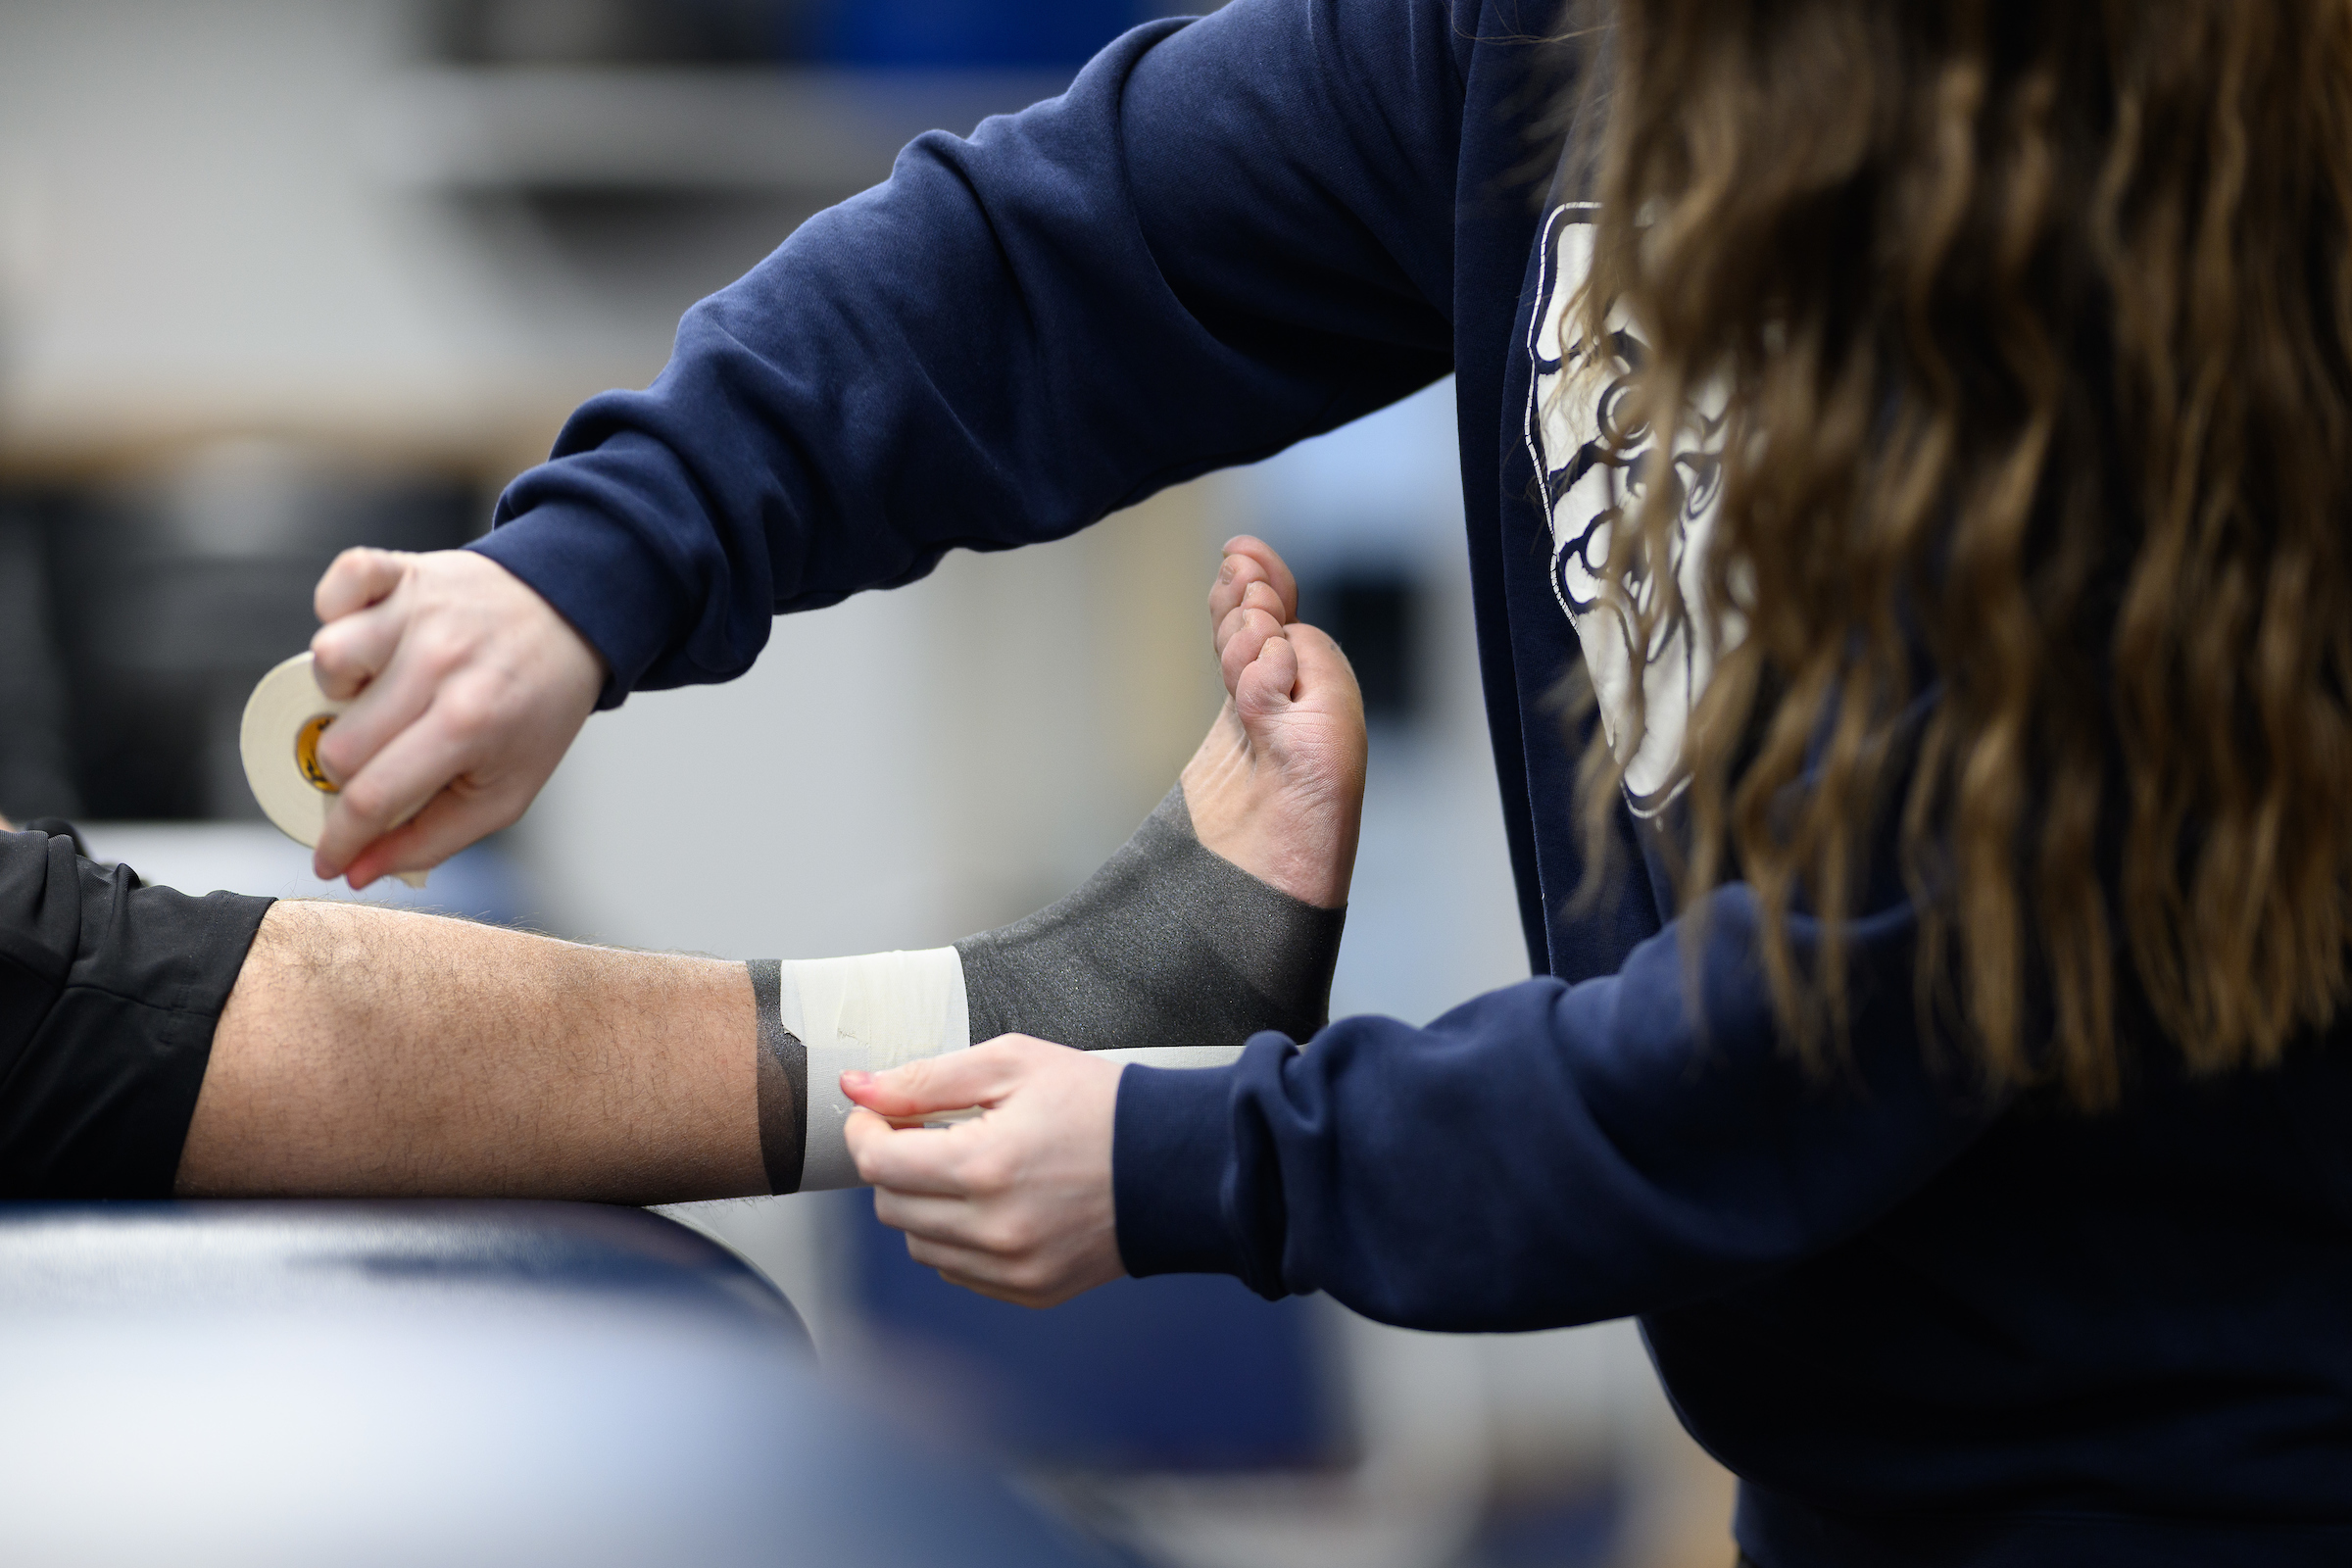 A student athletic trainer wraps an athlete's ankle.